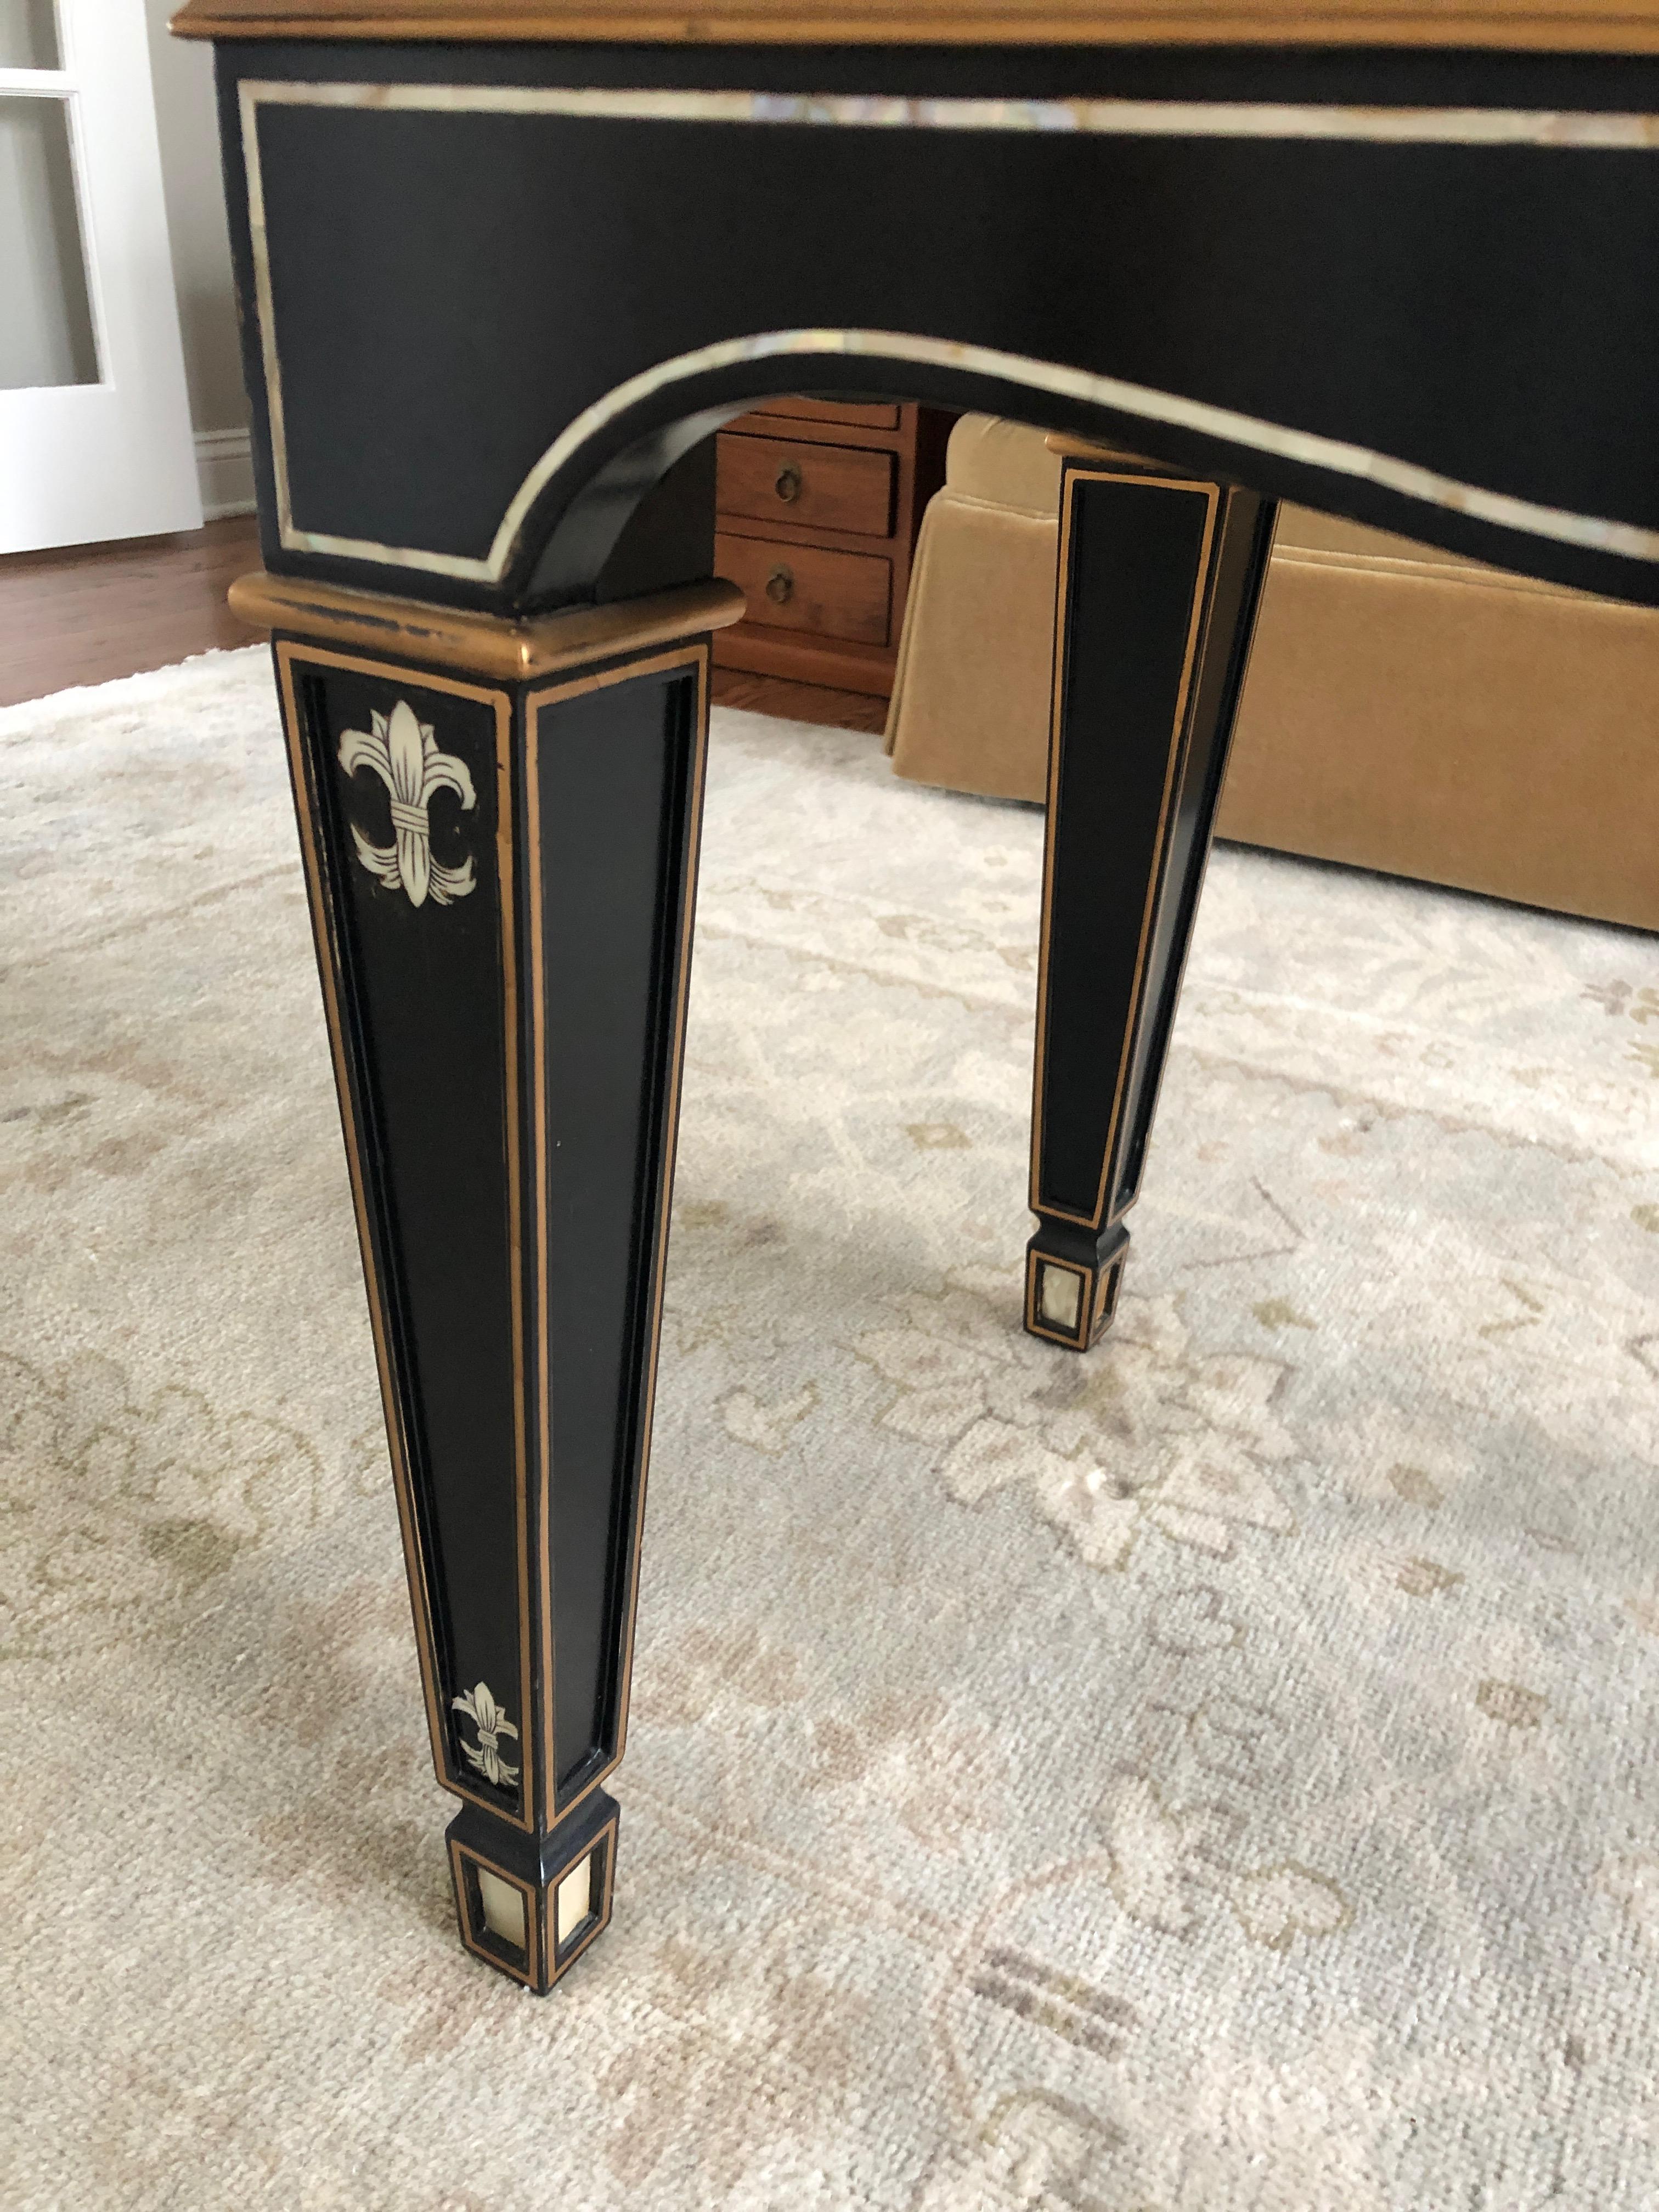 Mother-of-Pearl Gem of a Hollywood Regency Black White and Gold Small Sized Tray Coffee Table